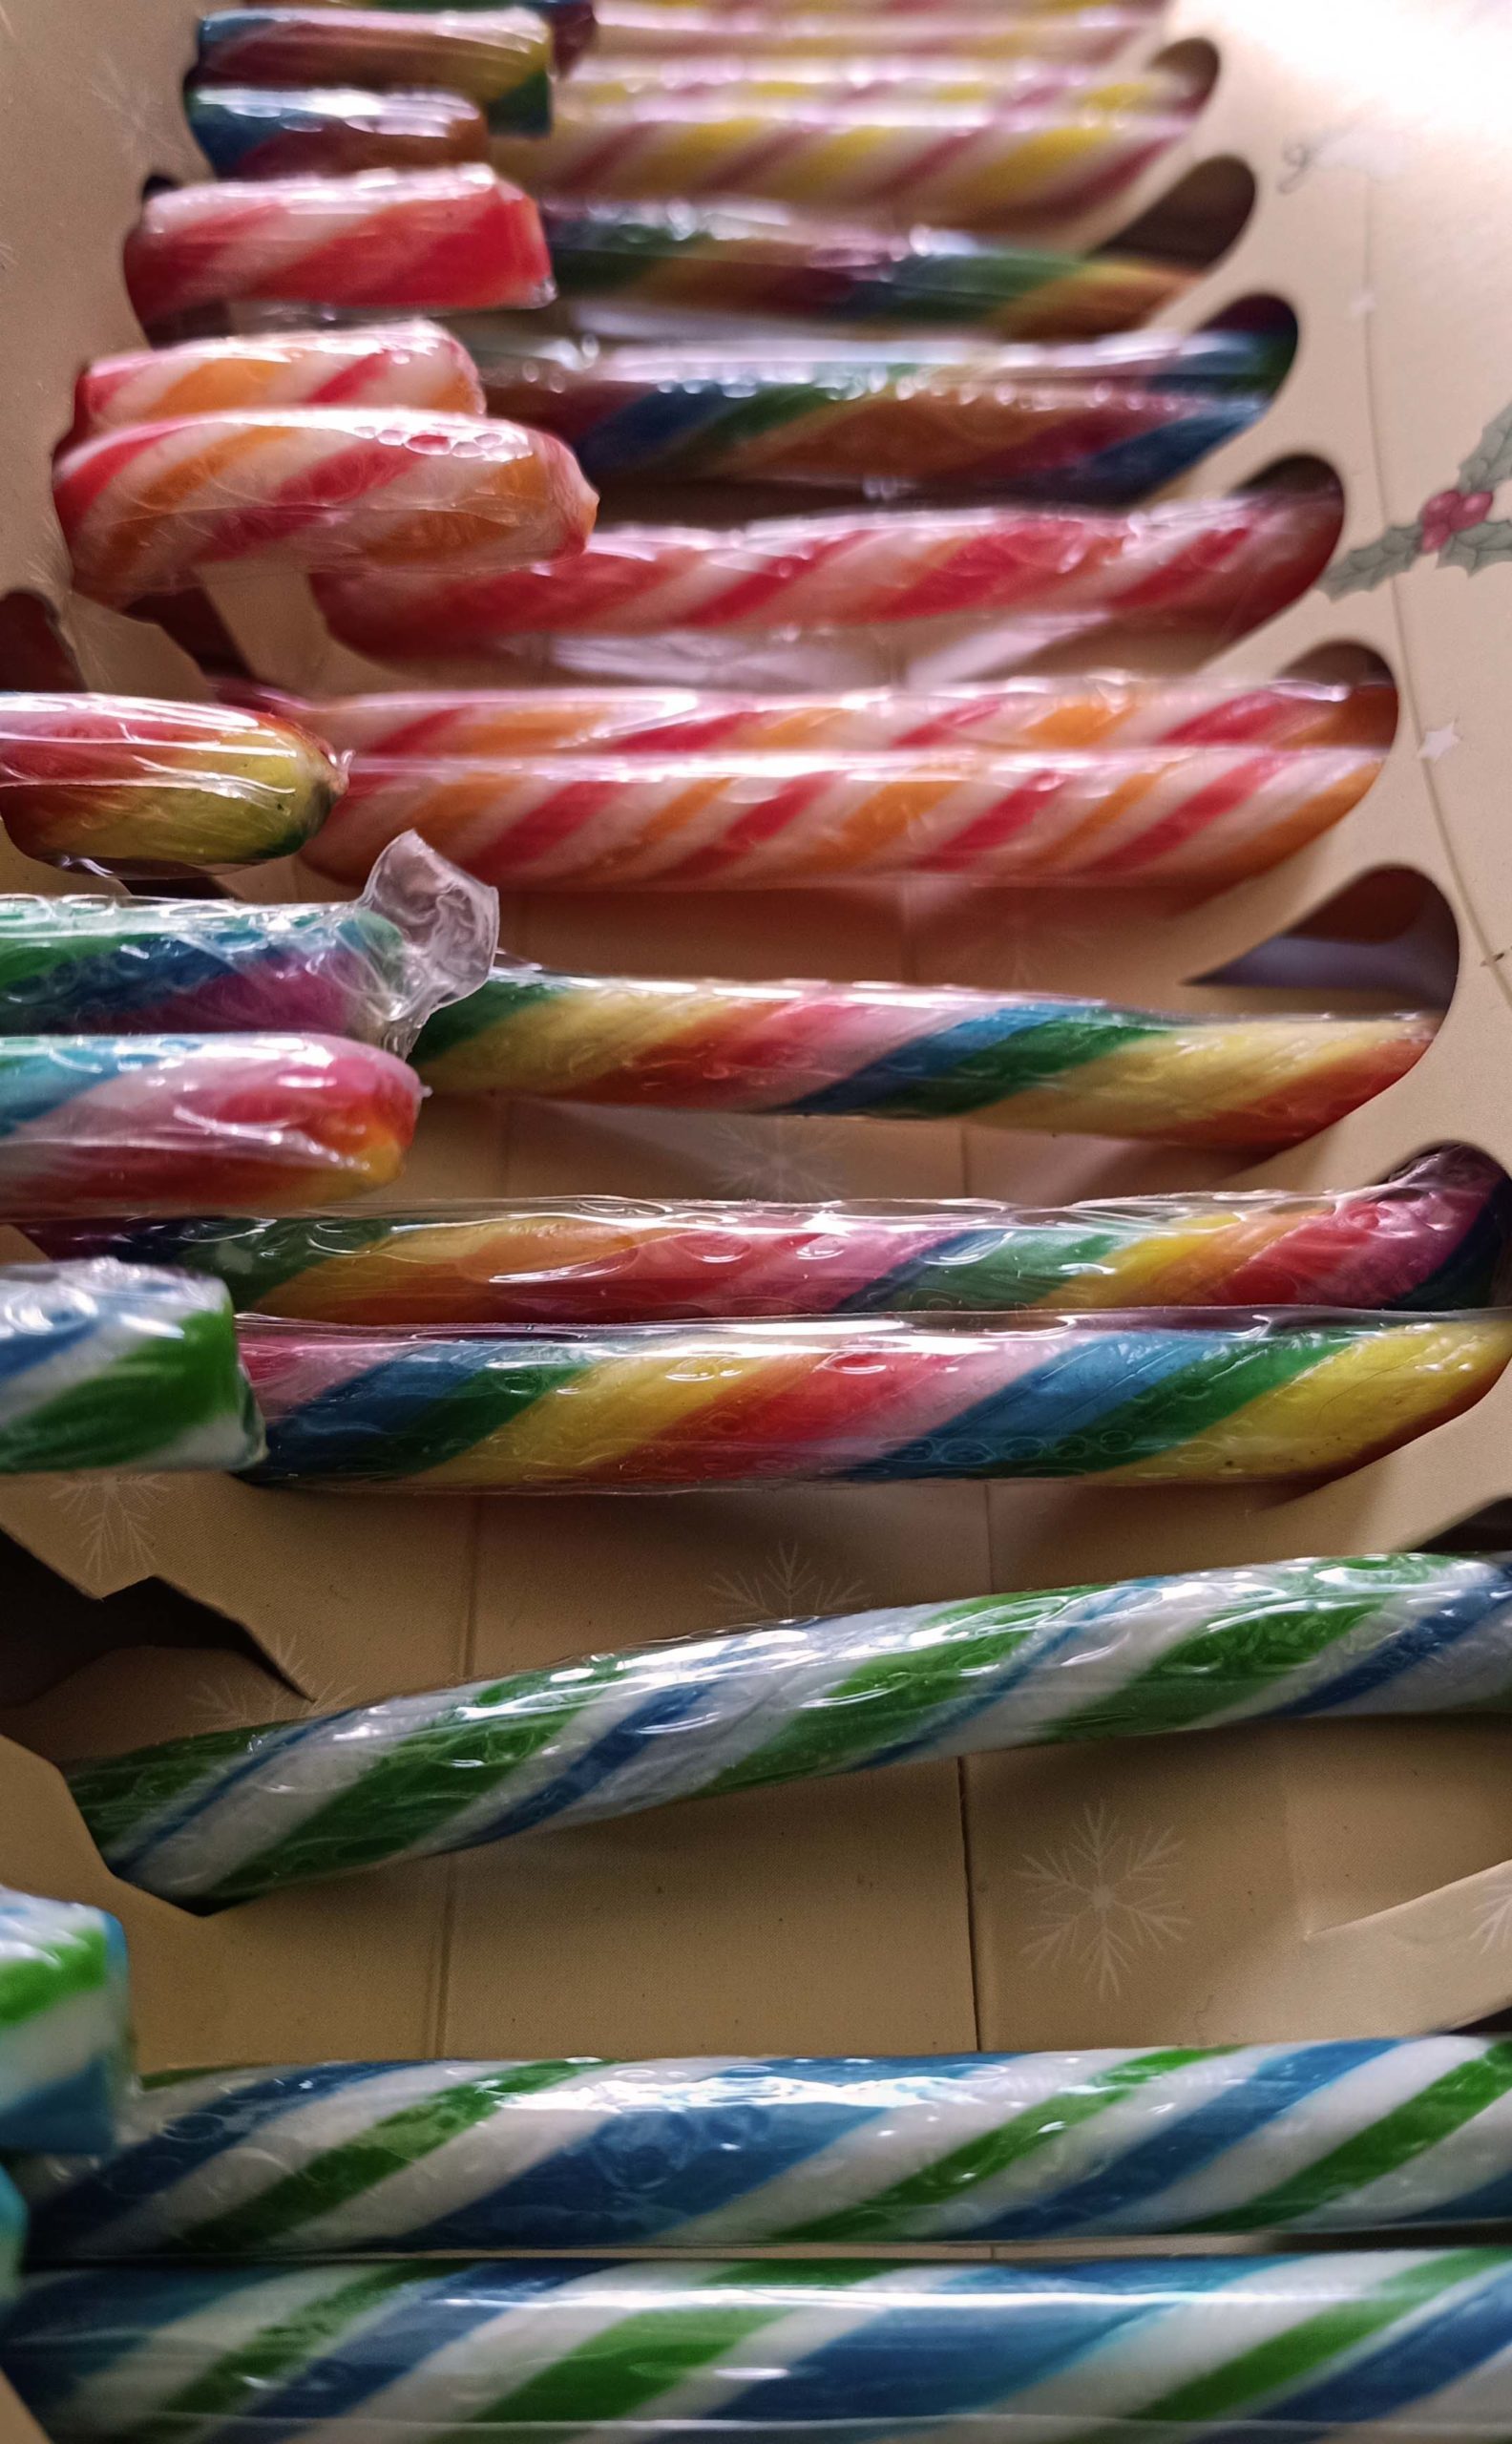 Another Year is Ending as Christmas approaches. Photo of candy canes in a box.